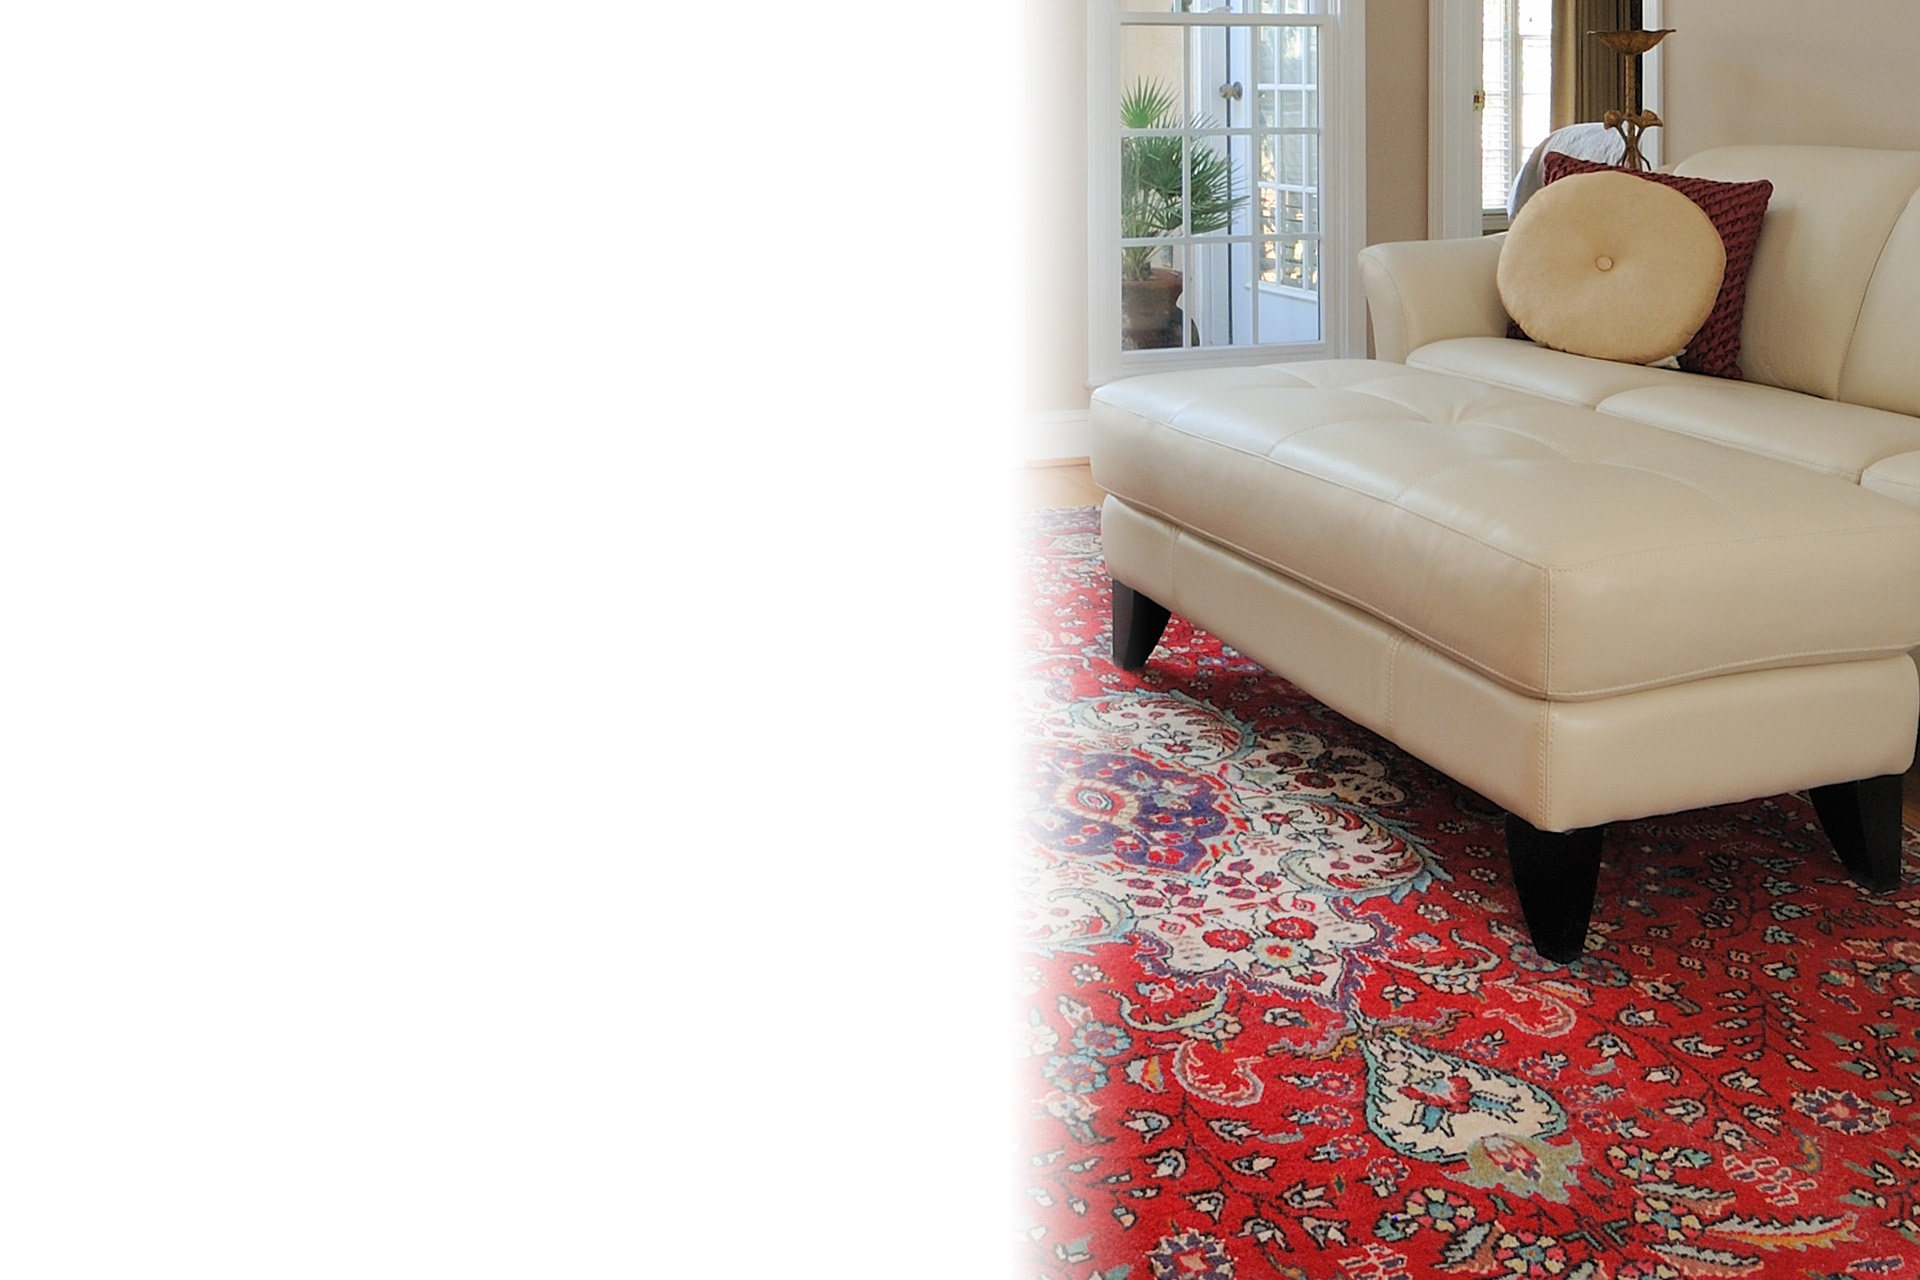 oriental rug cleaning services